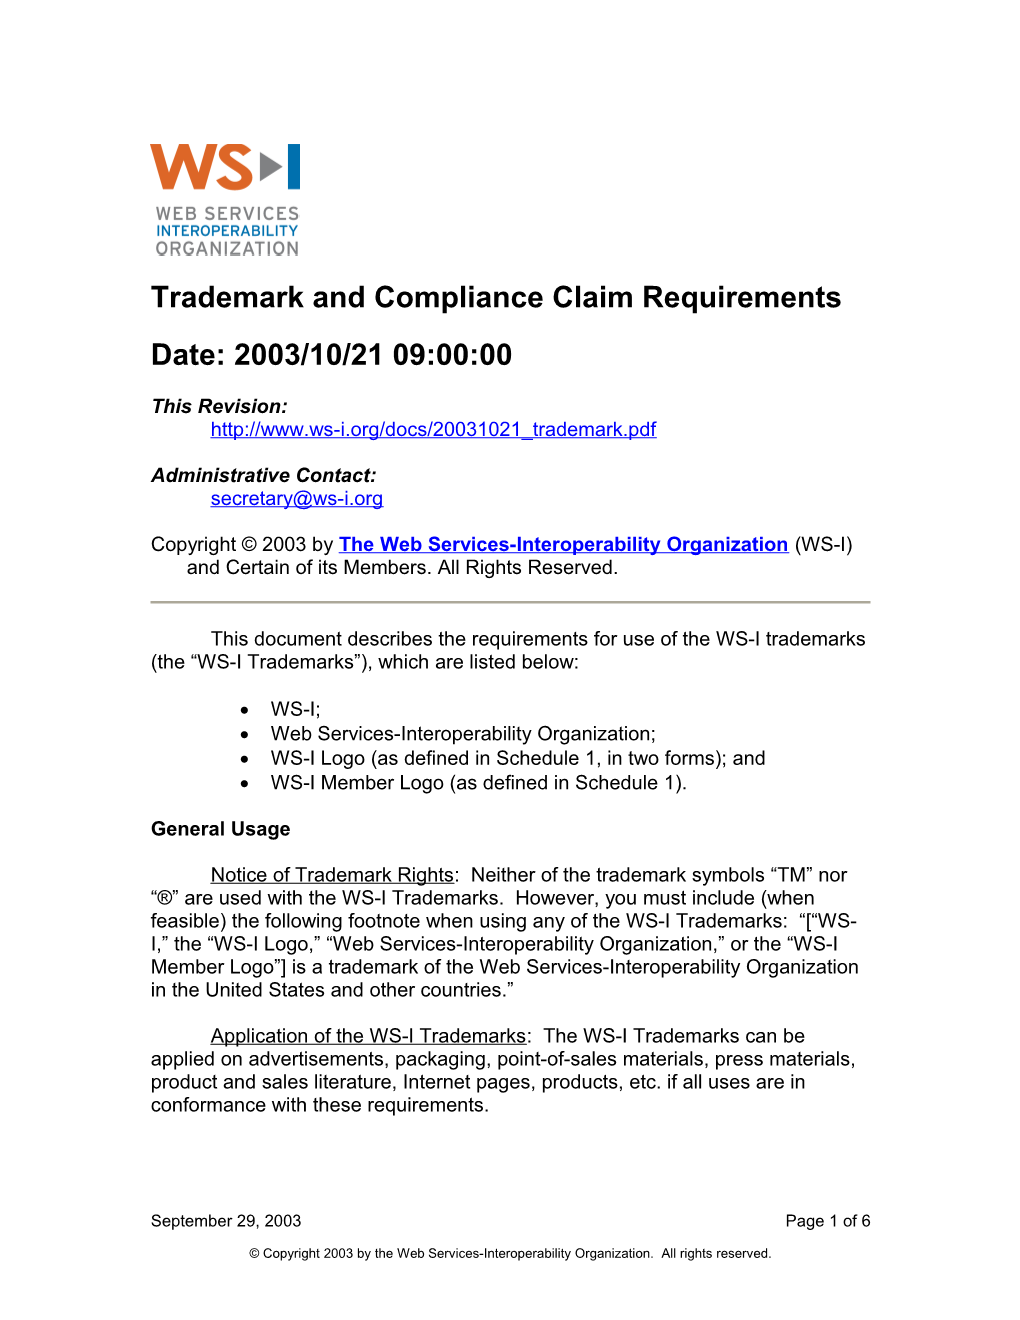 WS-I Trademark and Compliance Claim Requirements